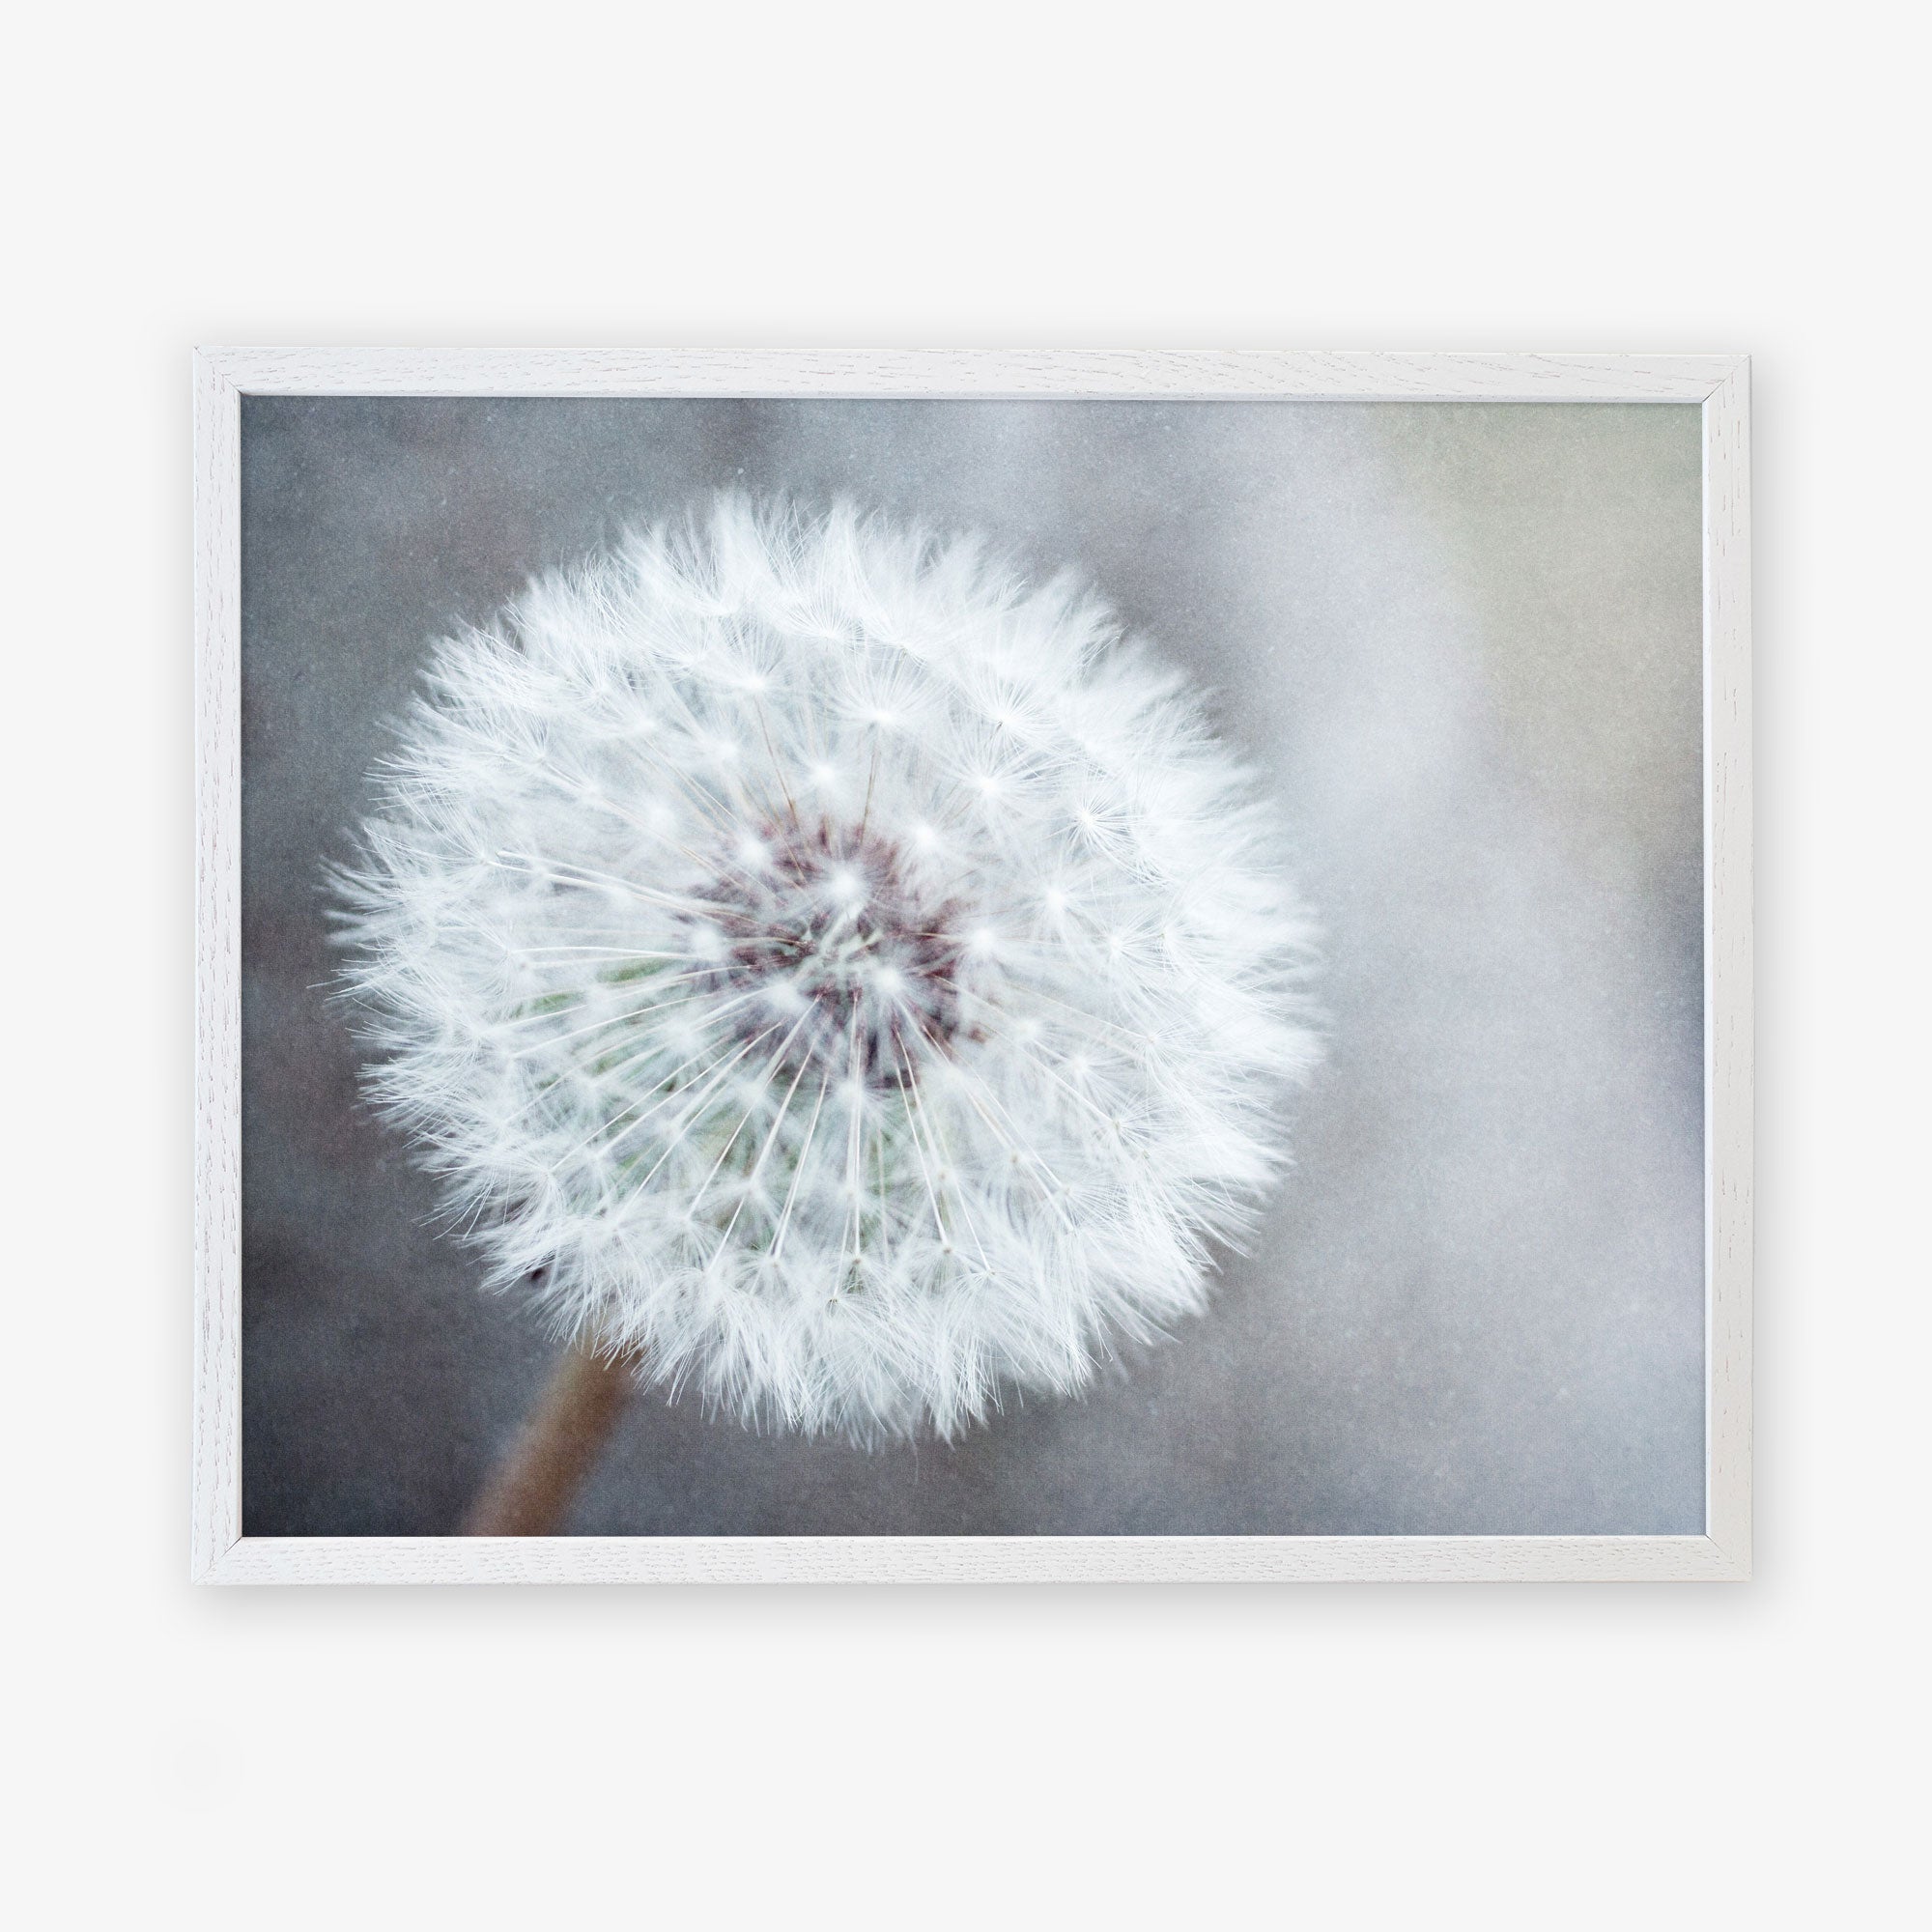 A framed photograph of a Neutral Grey Floral Print, &#39;Dandelion King&#39; showcasing its delicate white filaments, produced on archival photographic paper, against a softly focused grey background by Offley Green.